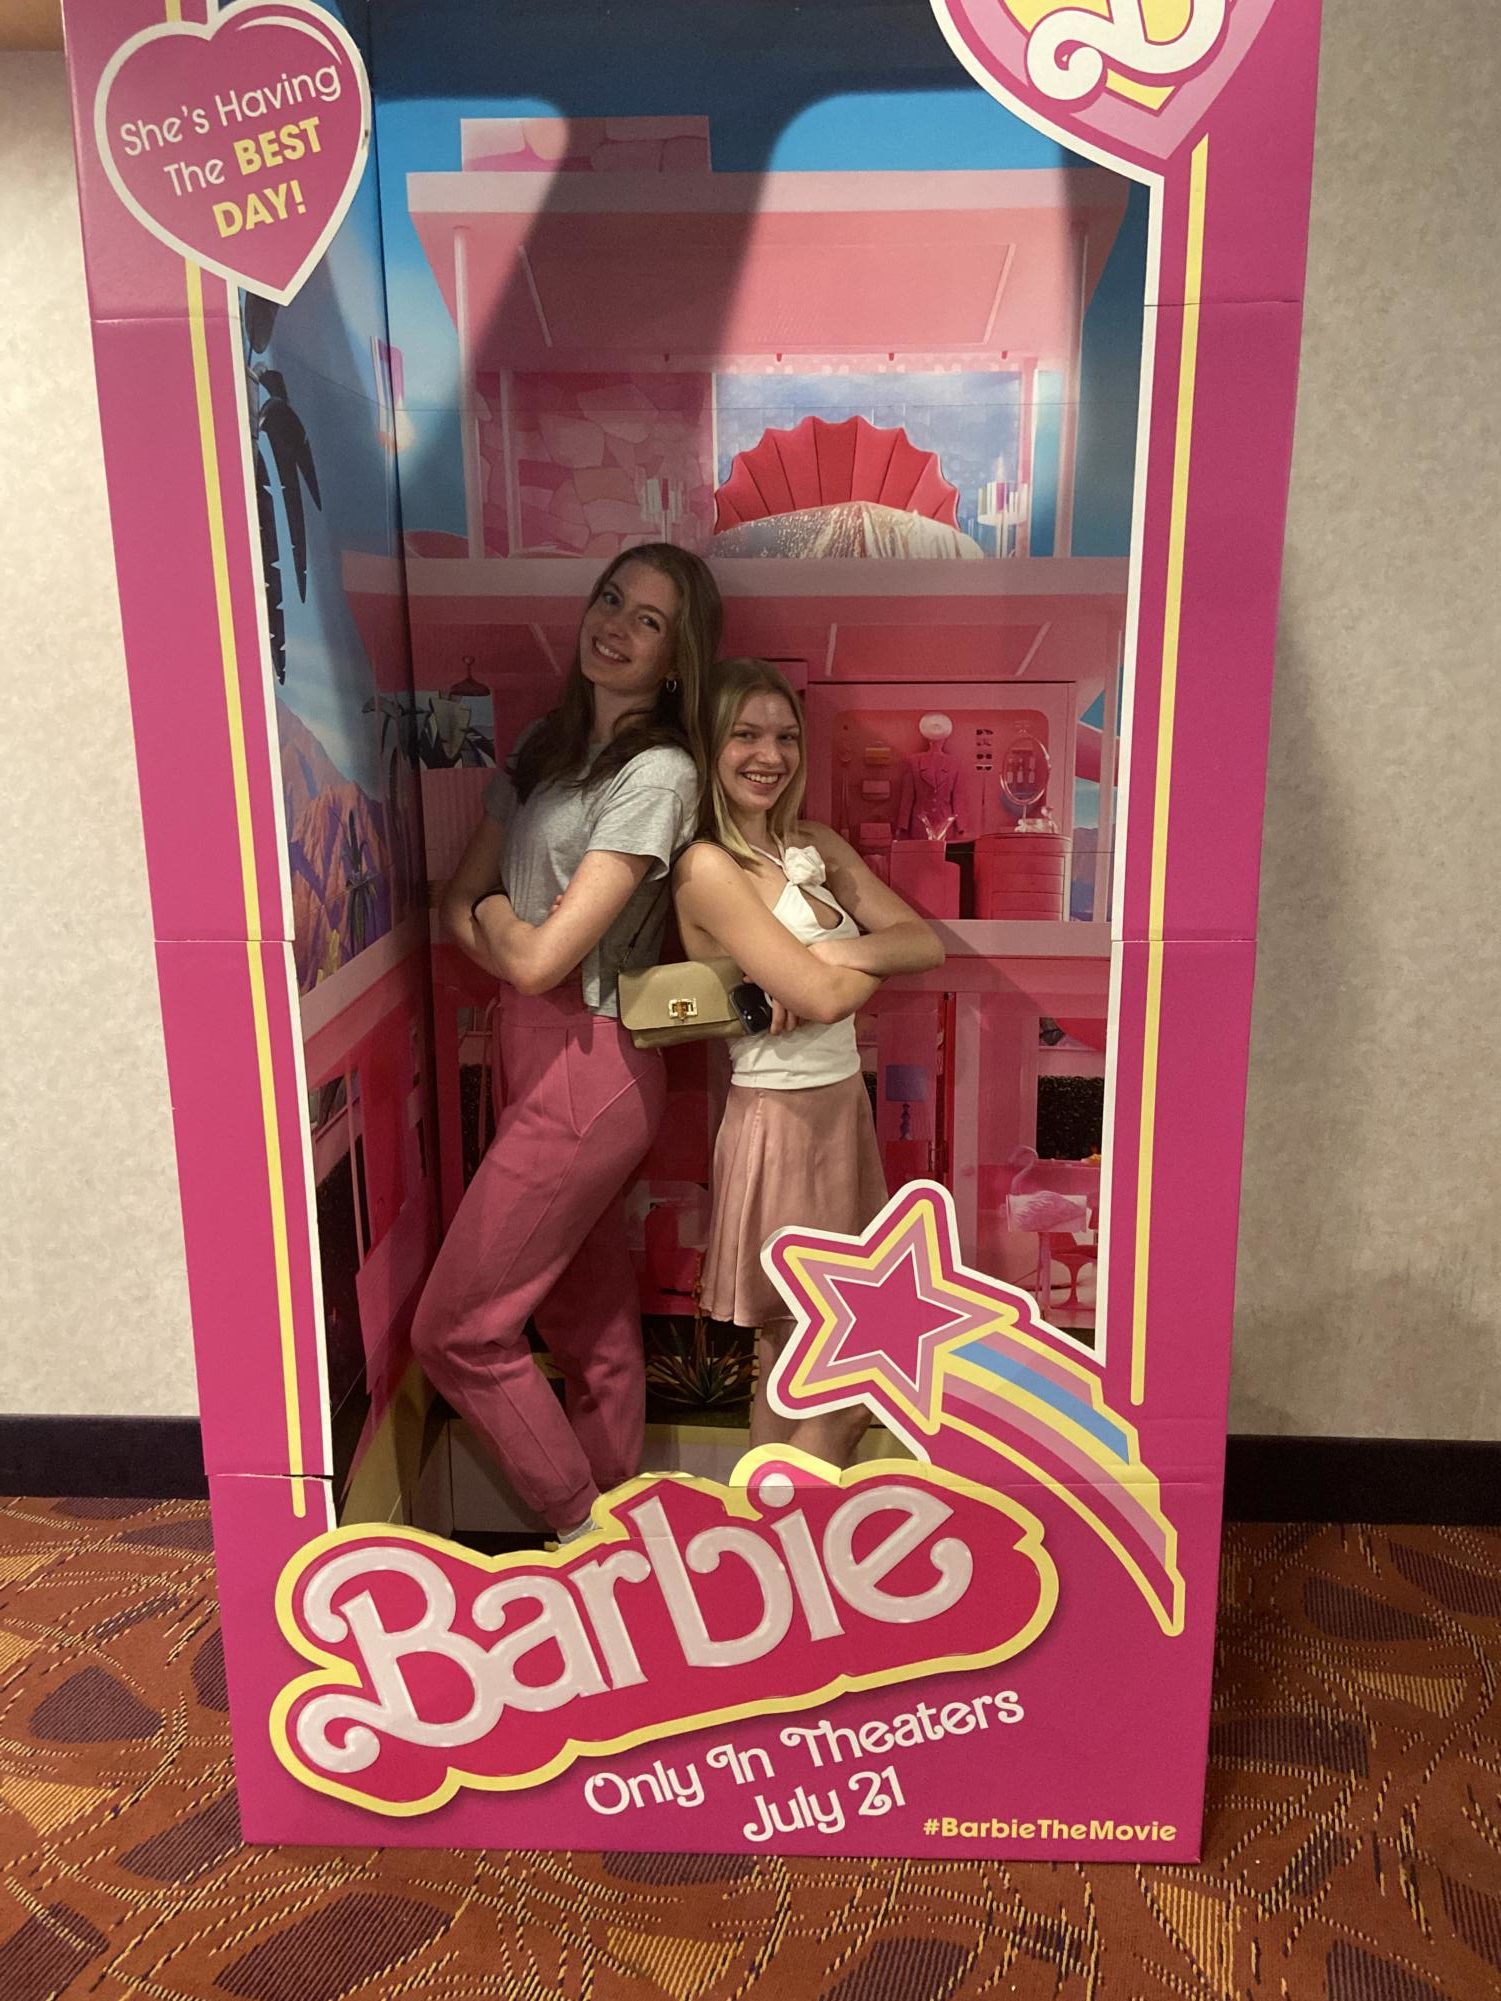 Wearing pink to watch “Barbie” and black to see “Oppenheimer” has become an exciting trend. Kate Rekas ‘23 and Zoe Edinburgh ‘23 posed in a Barbie box dressed in pink.